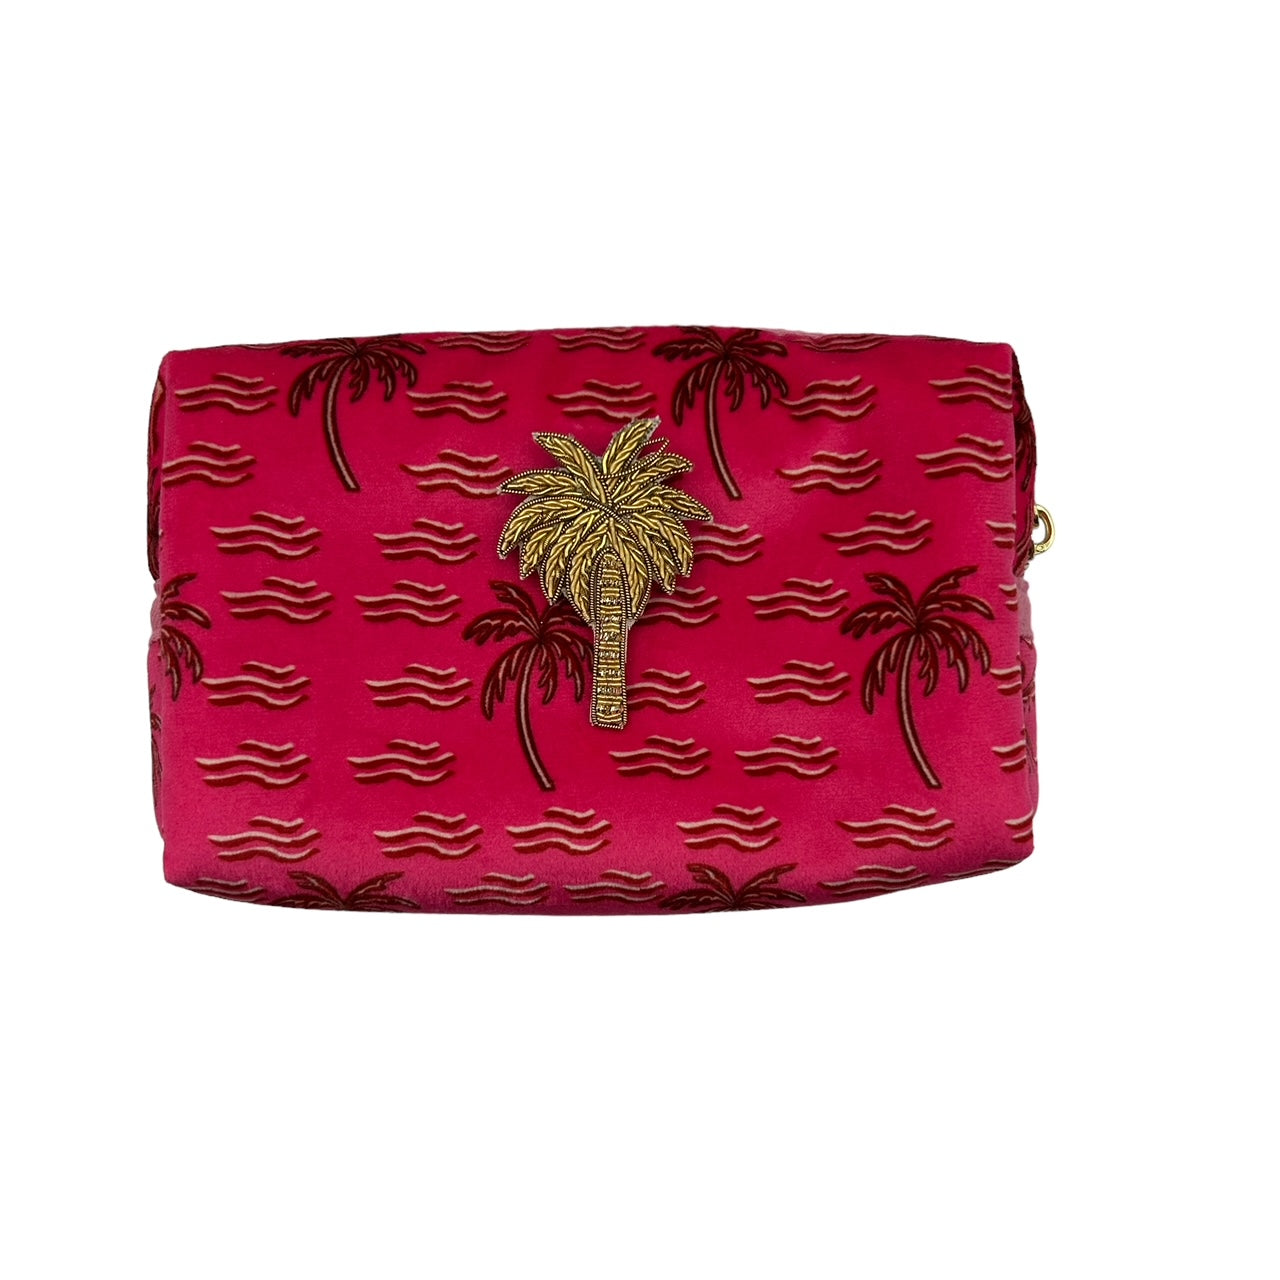 Pink palm tree make-up bag & palm brooch - recycled velvet, large and small